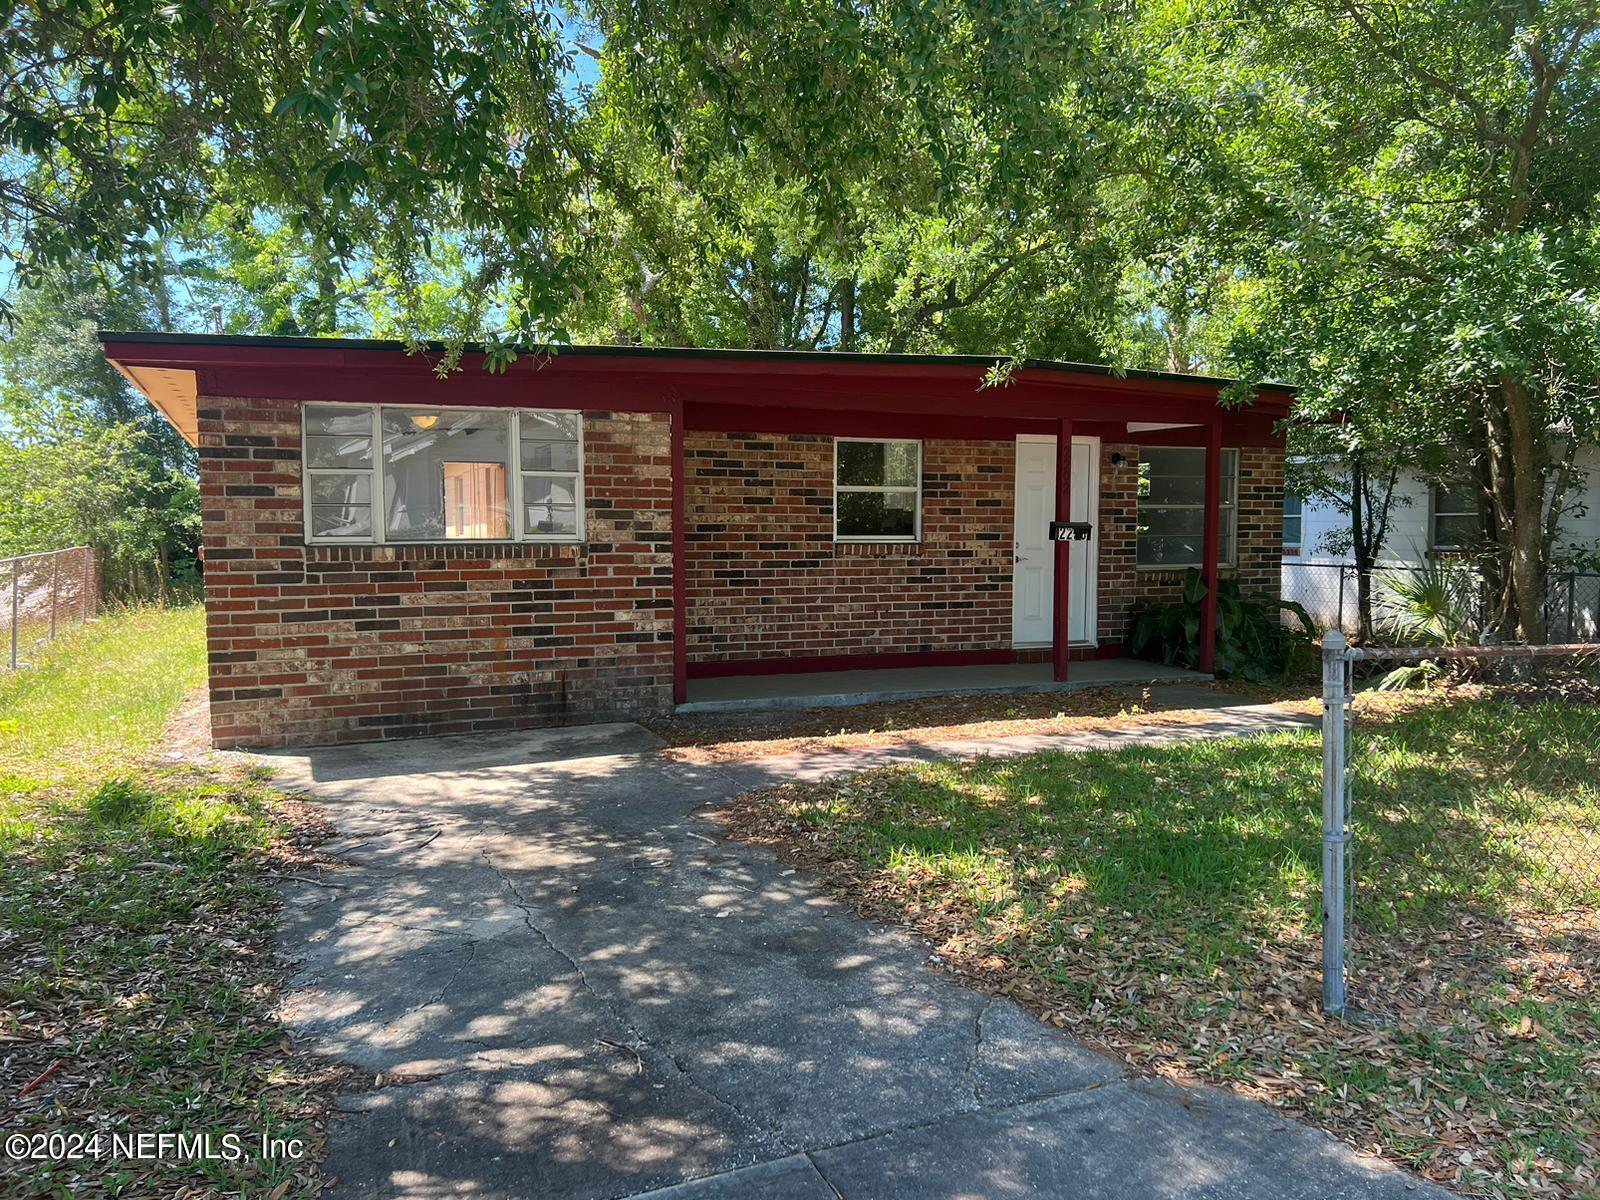 Jacksonville, FL home for sale located at 2202 W 12th Street, Jacksonville, FL 32209